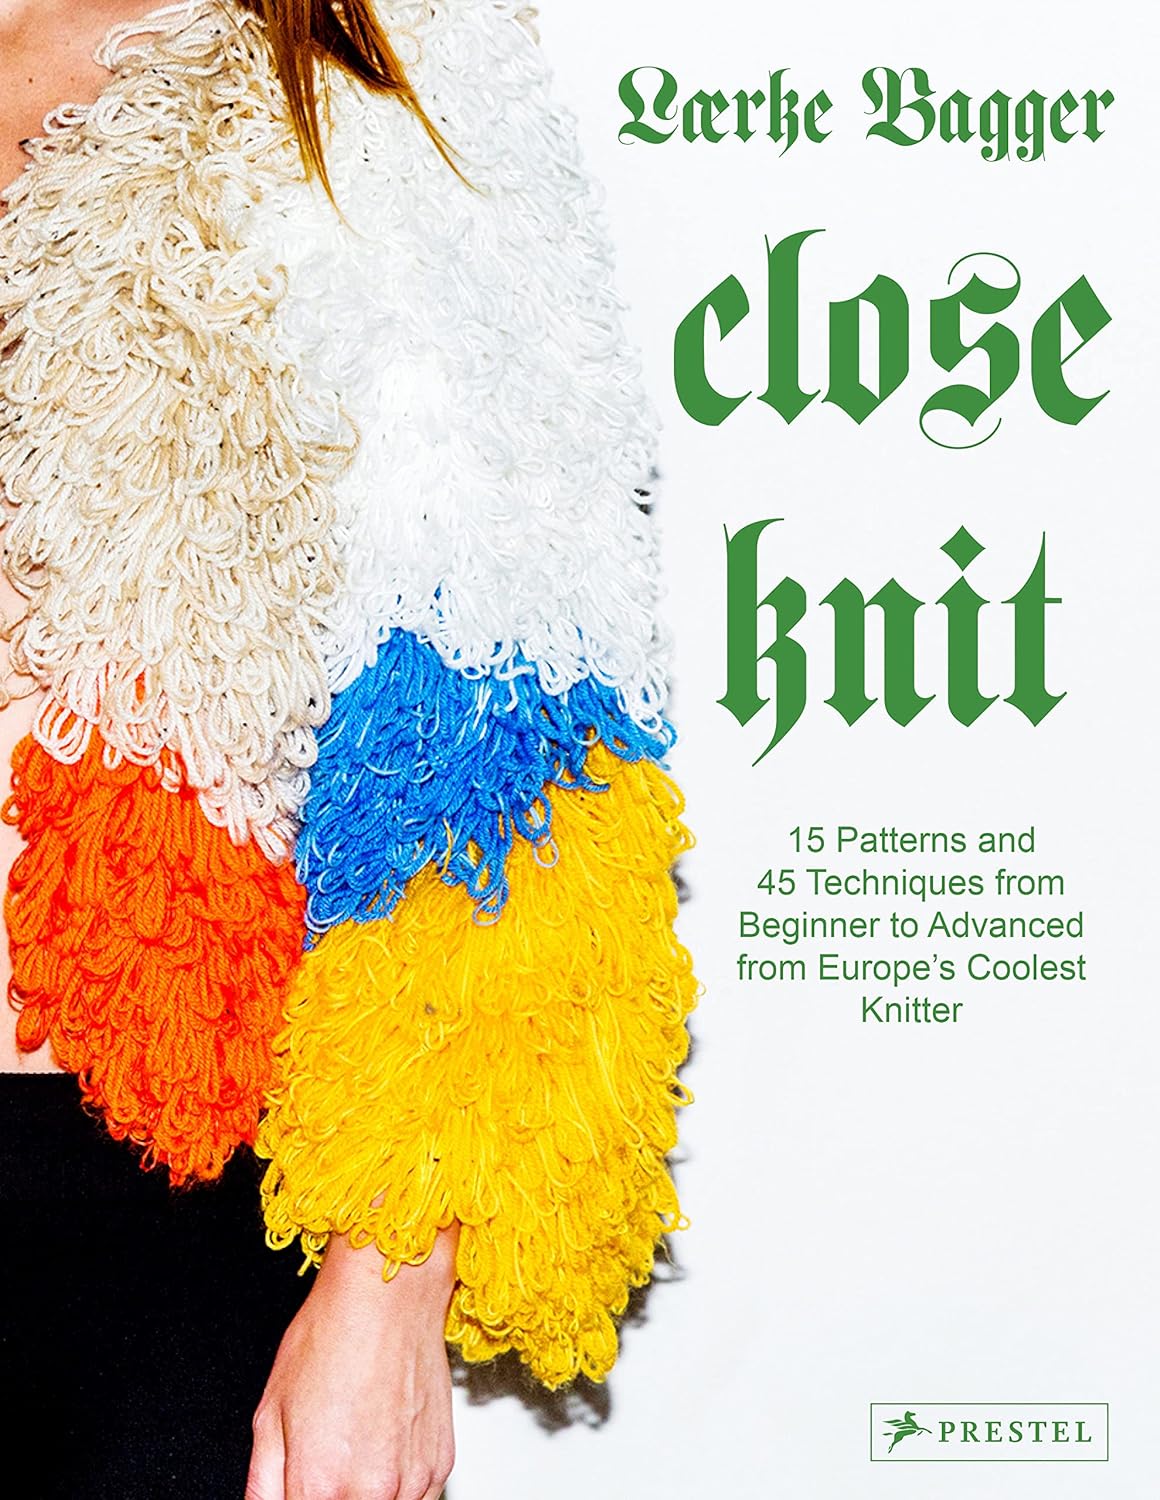 Close Knit: 15 Patterns and 45 Techniques from Beginner to Advanced from Europe's Coolest Knitter - homesewn